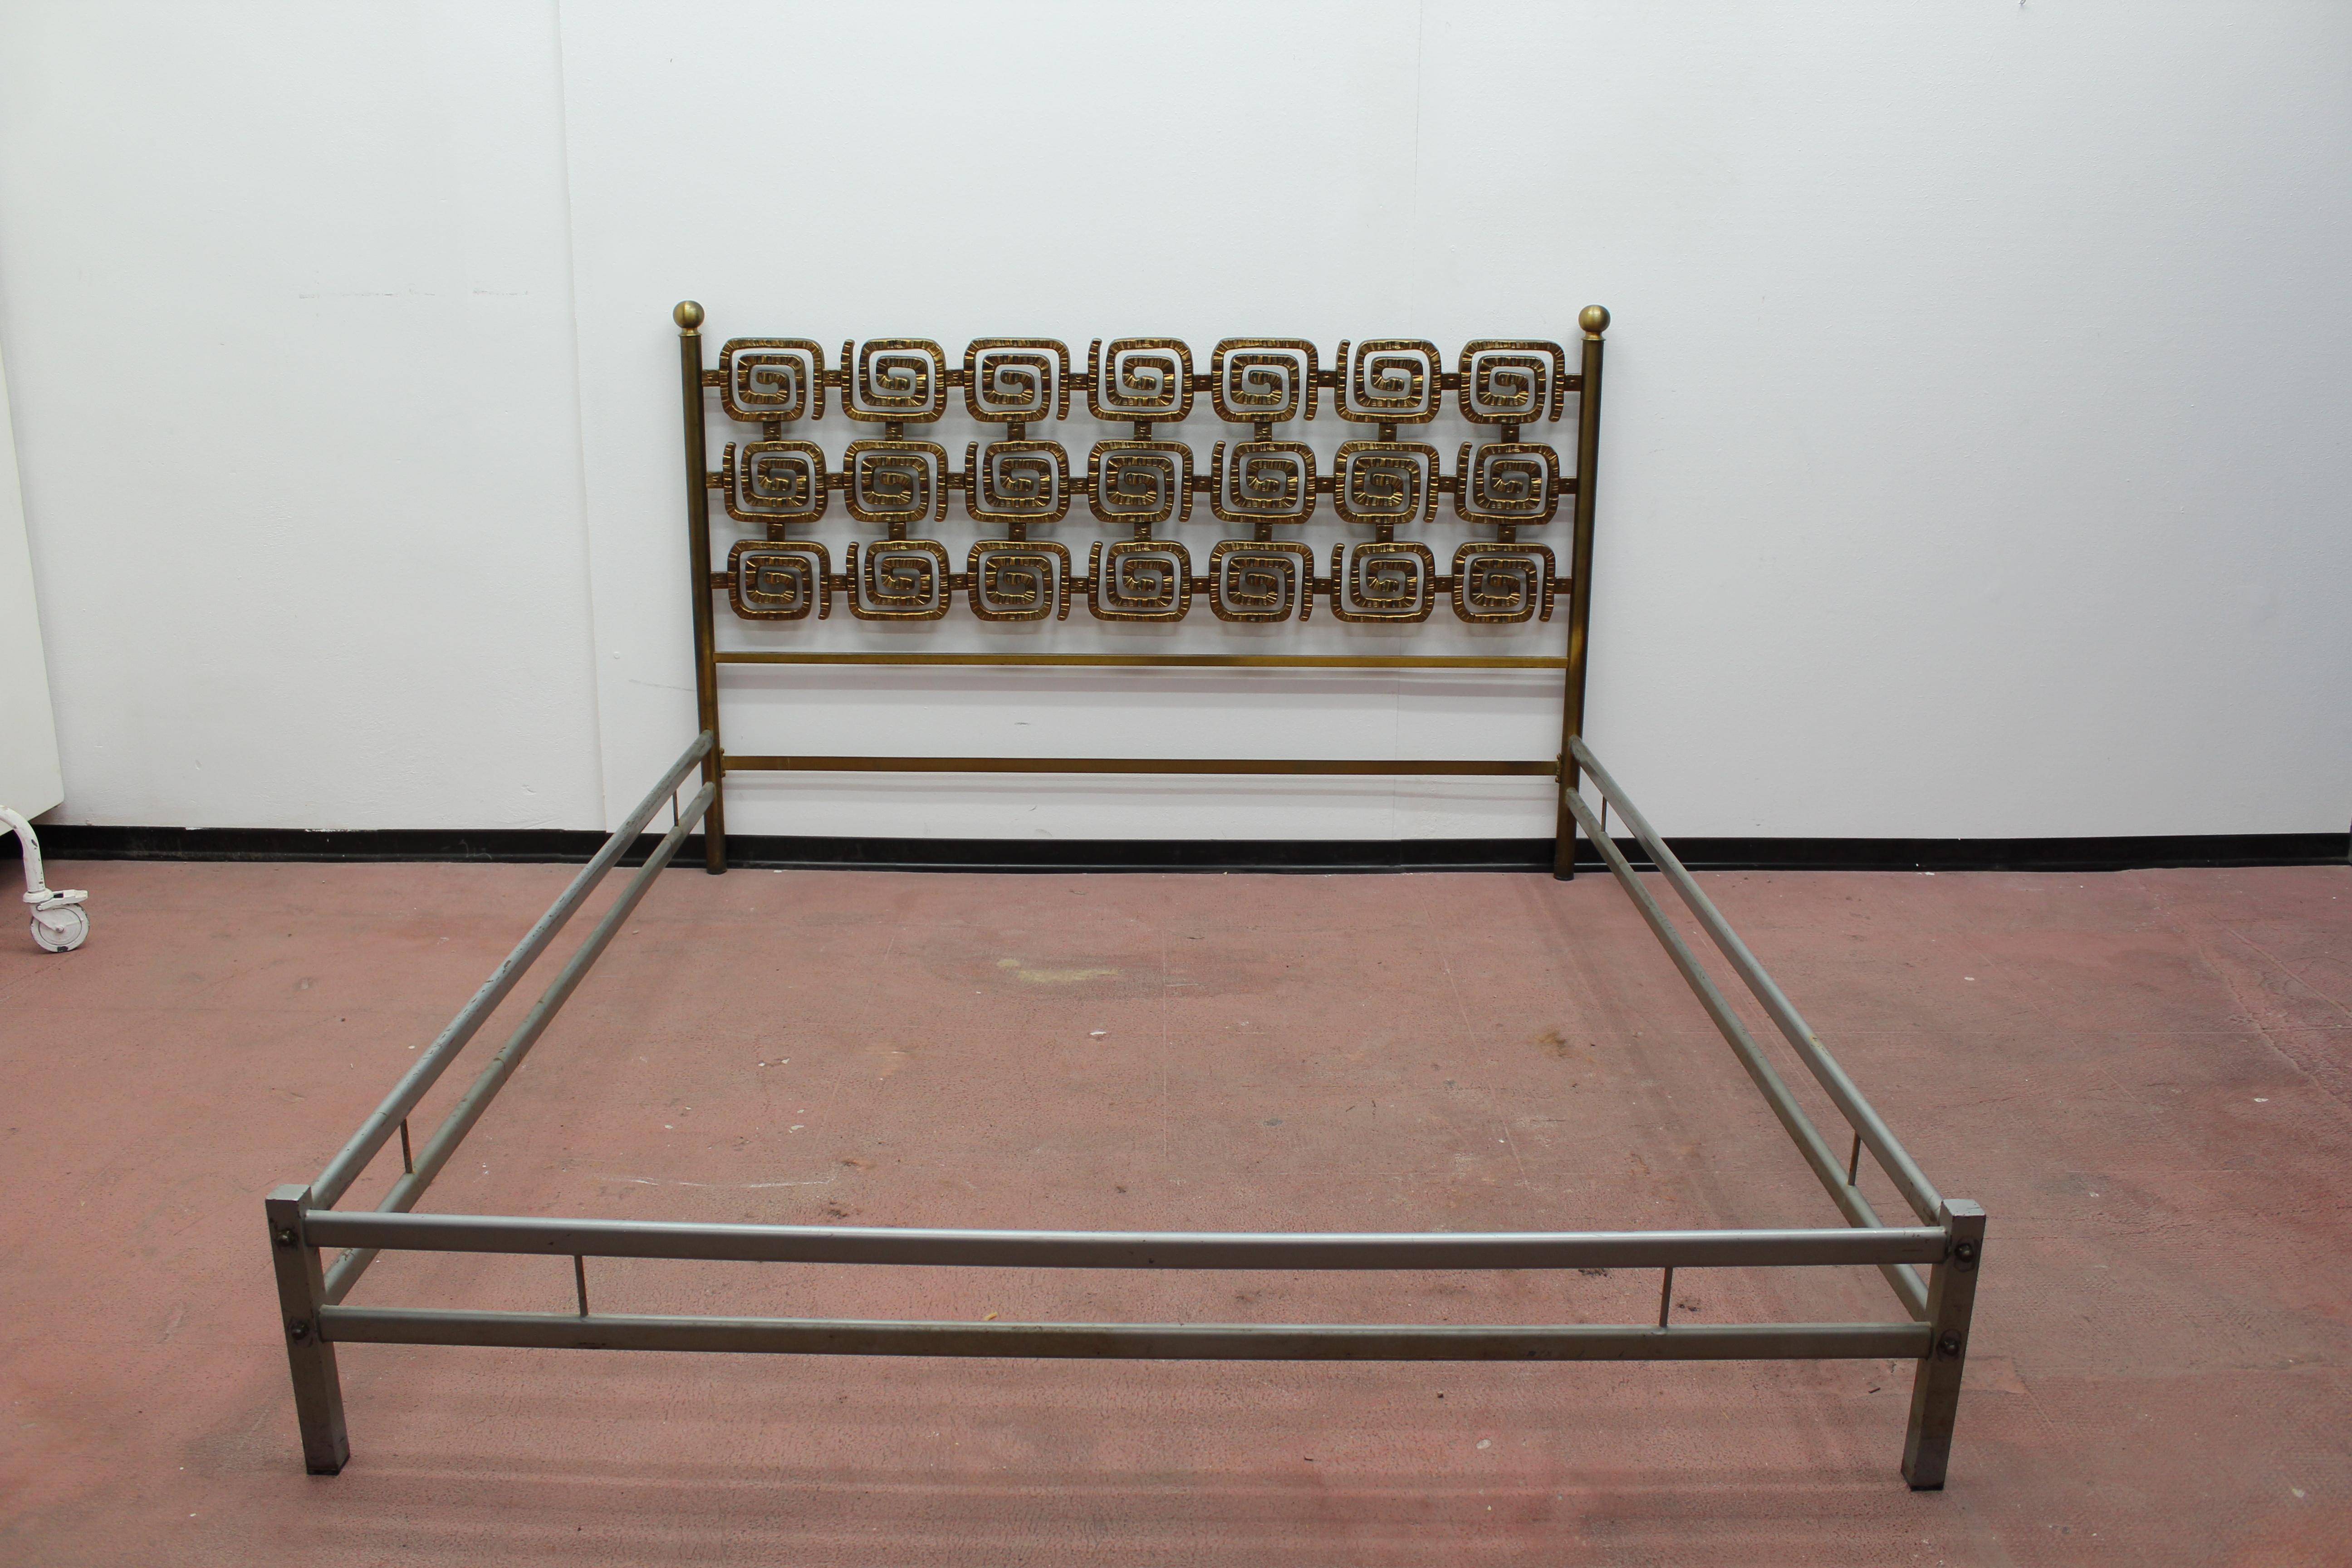 Beautifully crafted brass double bed by Italian artist Luciano Frigerio. The headboard and foot rail feature a wonderful heavy brass sculptural form interlocking loop motif with incised detailing in excellent condition. 
Wear consistent with age